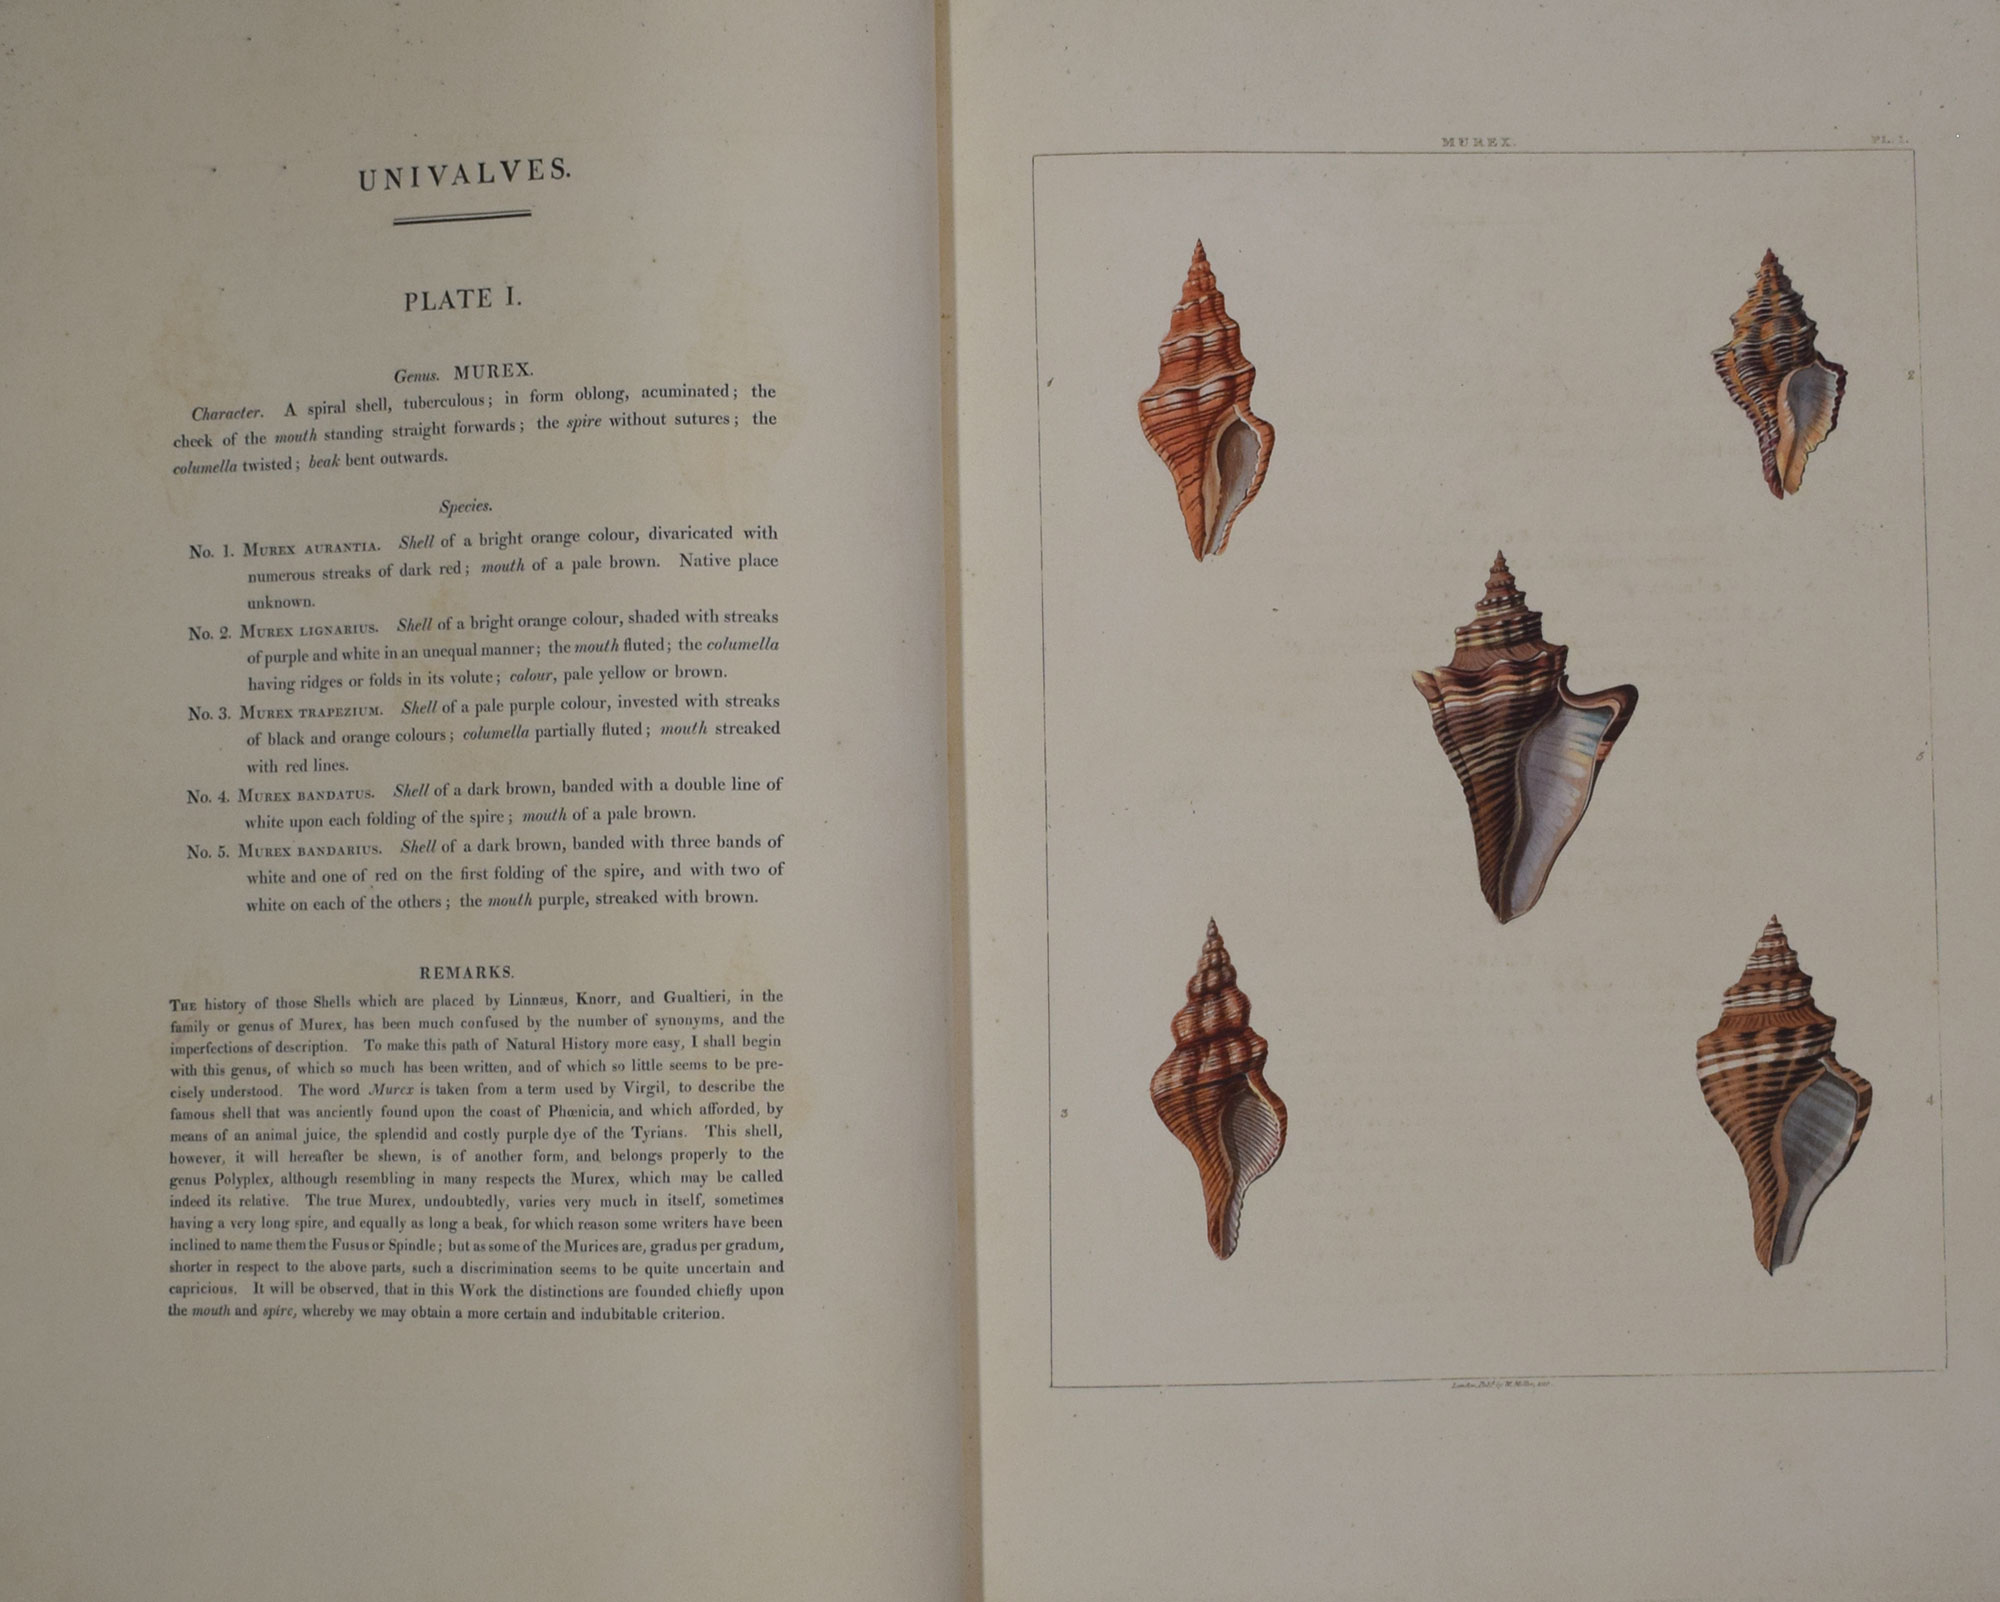 Conchology, or the Natural History of Shells: Containing a New Arrangement of the Genera and Species, Illustrated by Coloured Engravings Executed from the Natural Specimens, Including the Latest Discoveries.